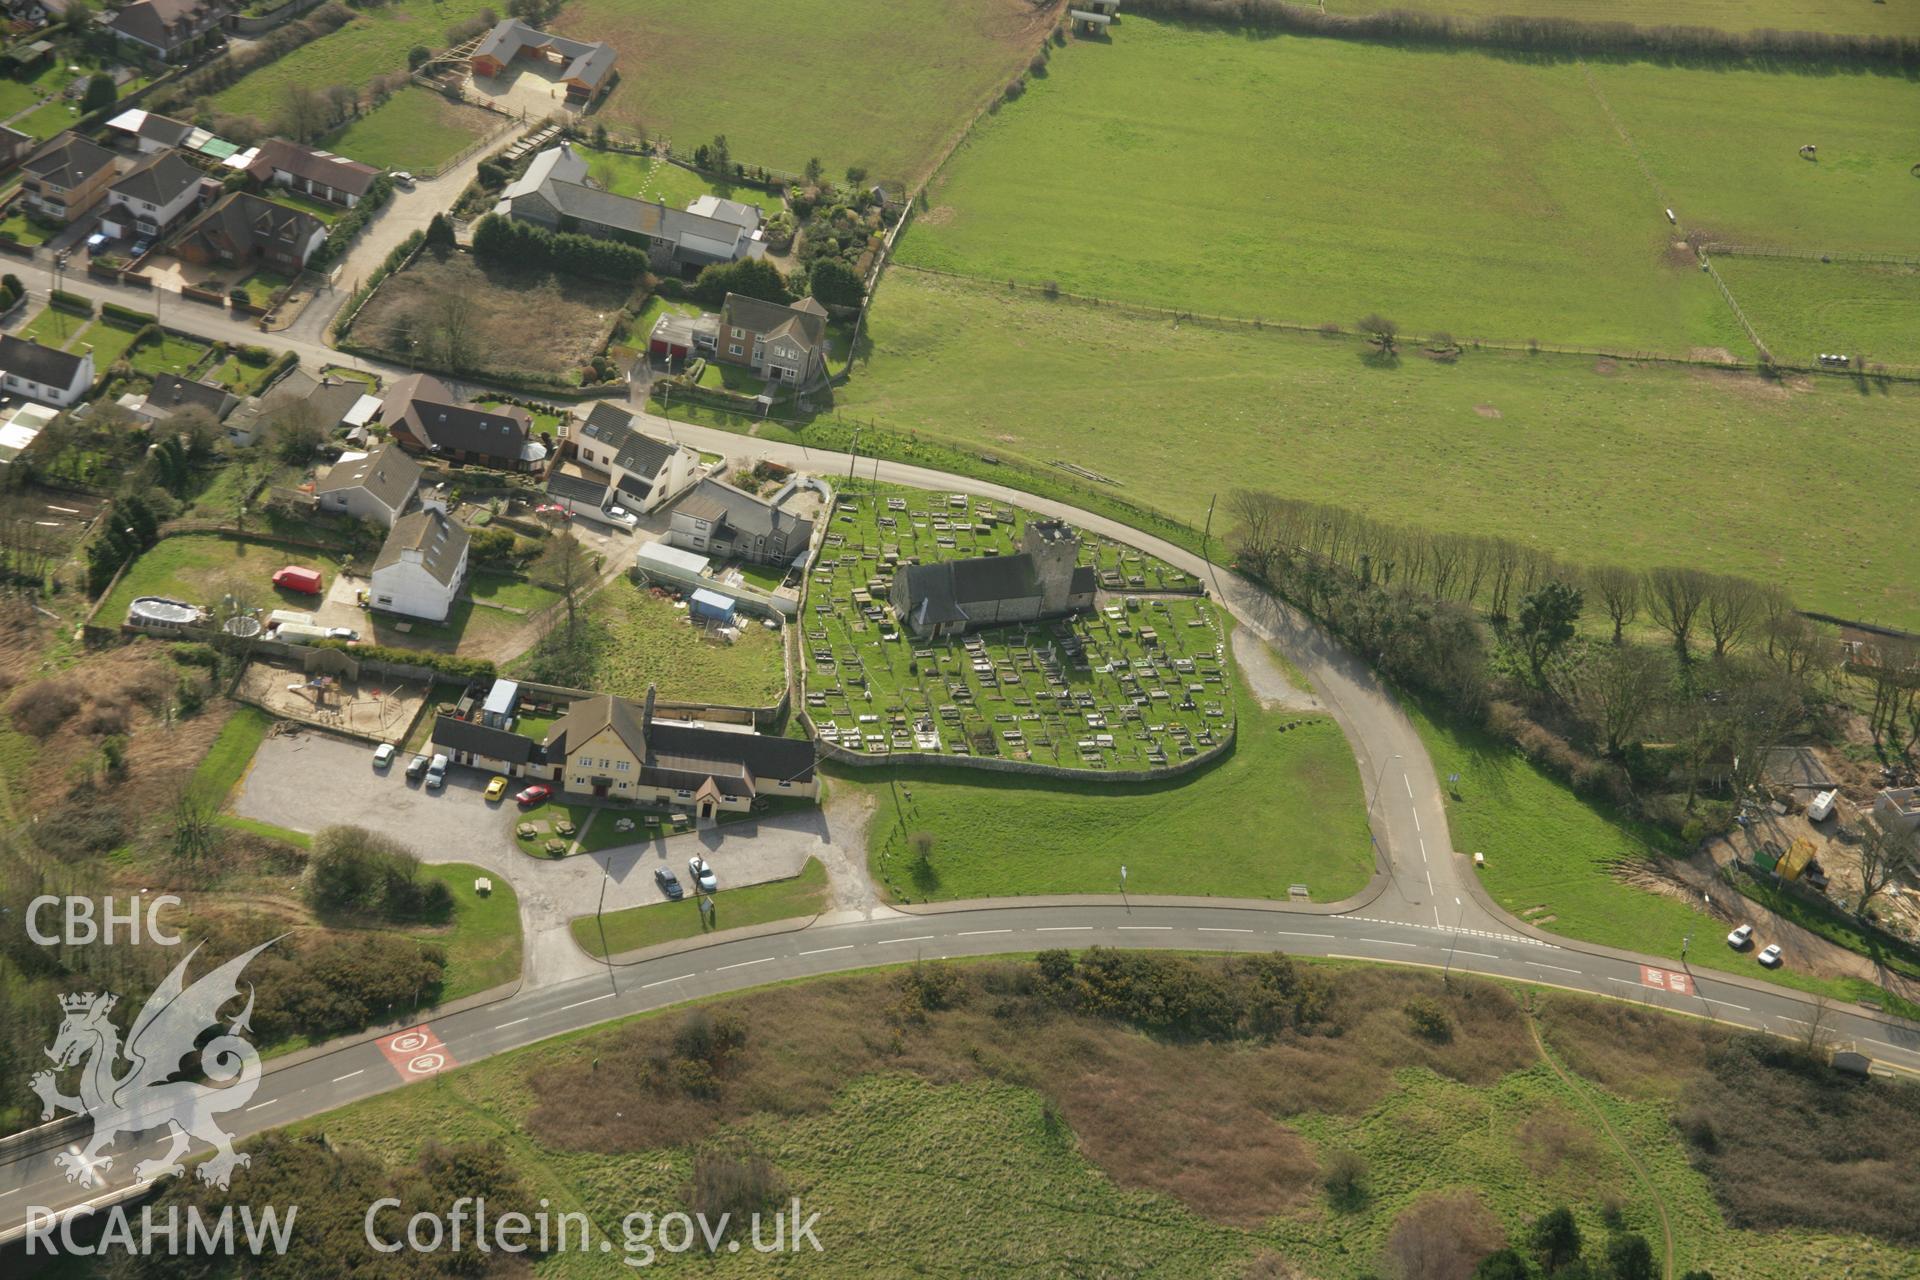 RCAHMW colour oblique aerial photograph of St Mary Magdalen's Church, Mawdlam. Taken on 16 March 2007 by Toby Driver